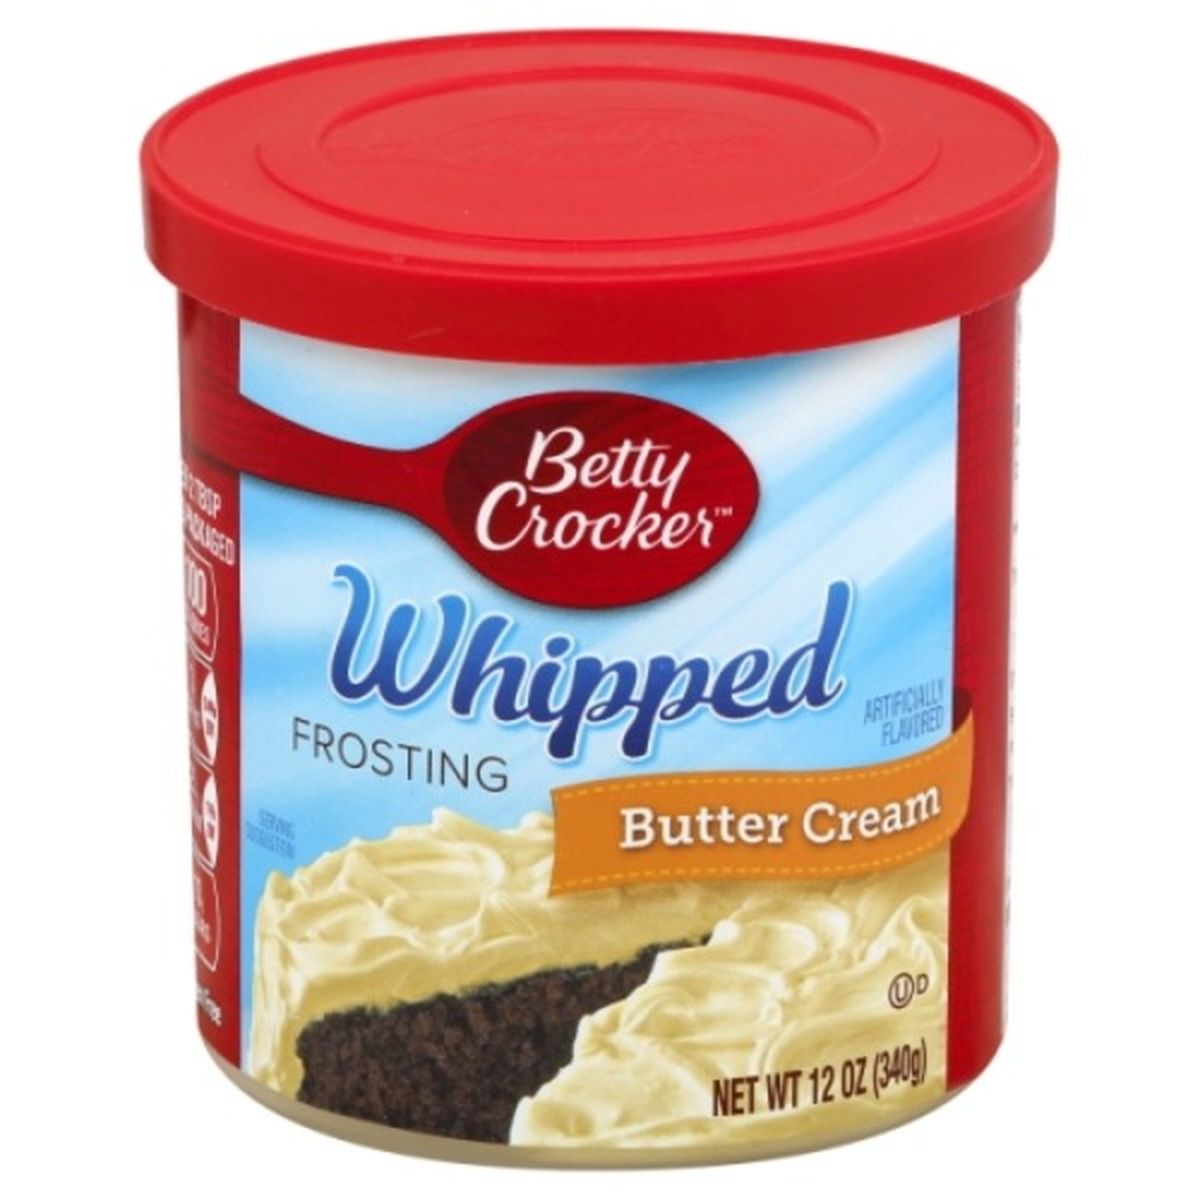 Calories in Betty Crocker Frosting, Whipped, Butter Cream